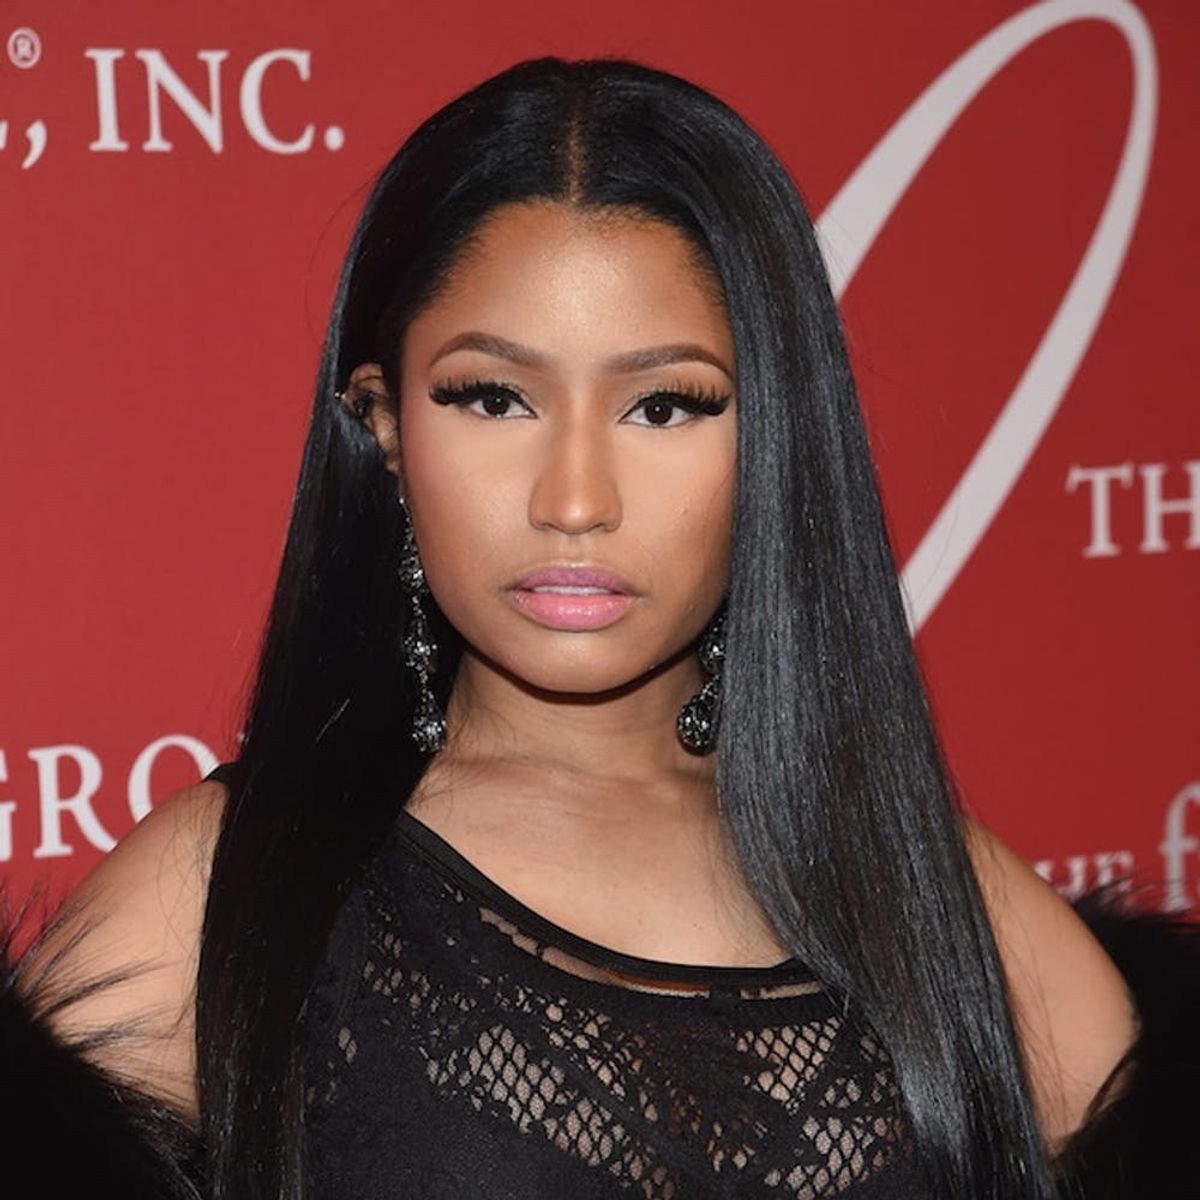 Why People Won’t Stop Talking About That Nicki Minaj and Remy Ma Feud